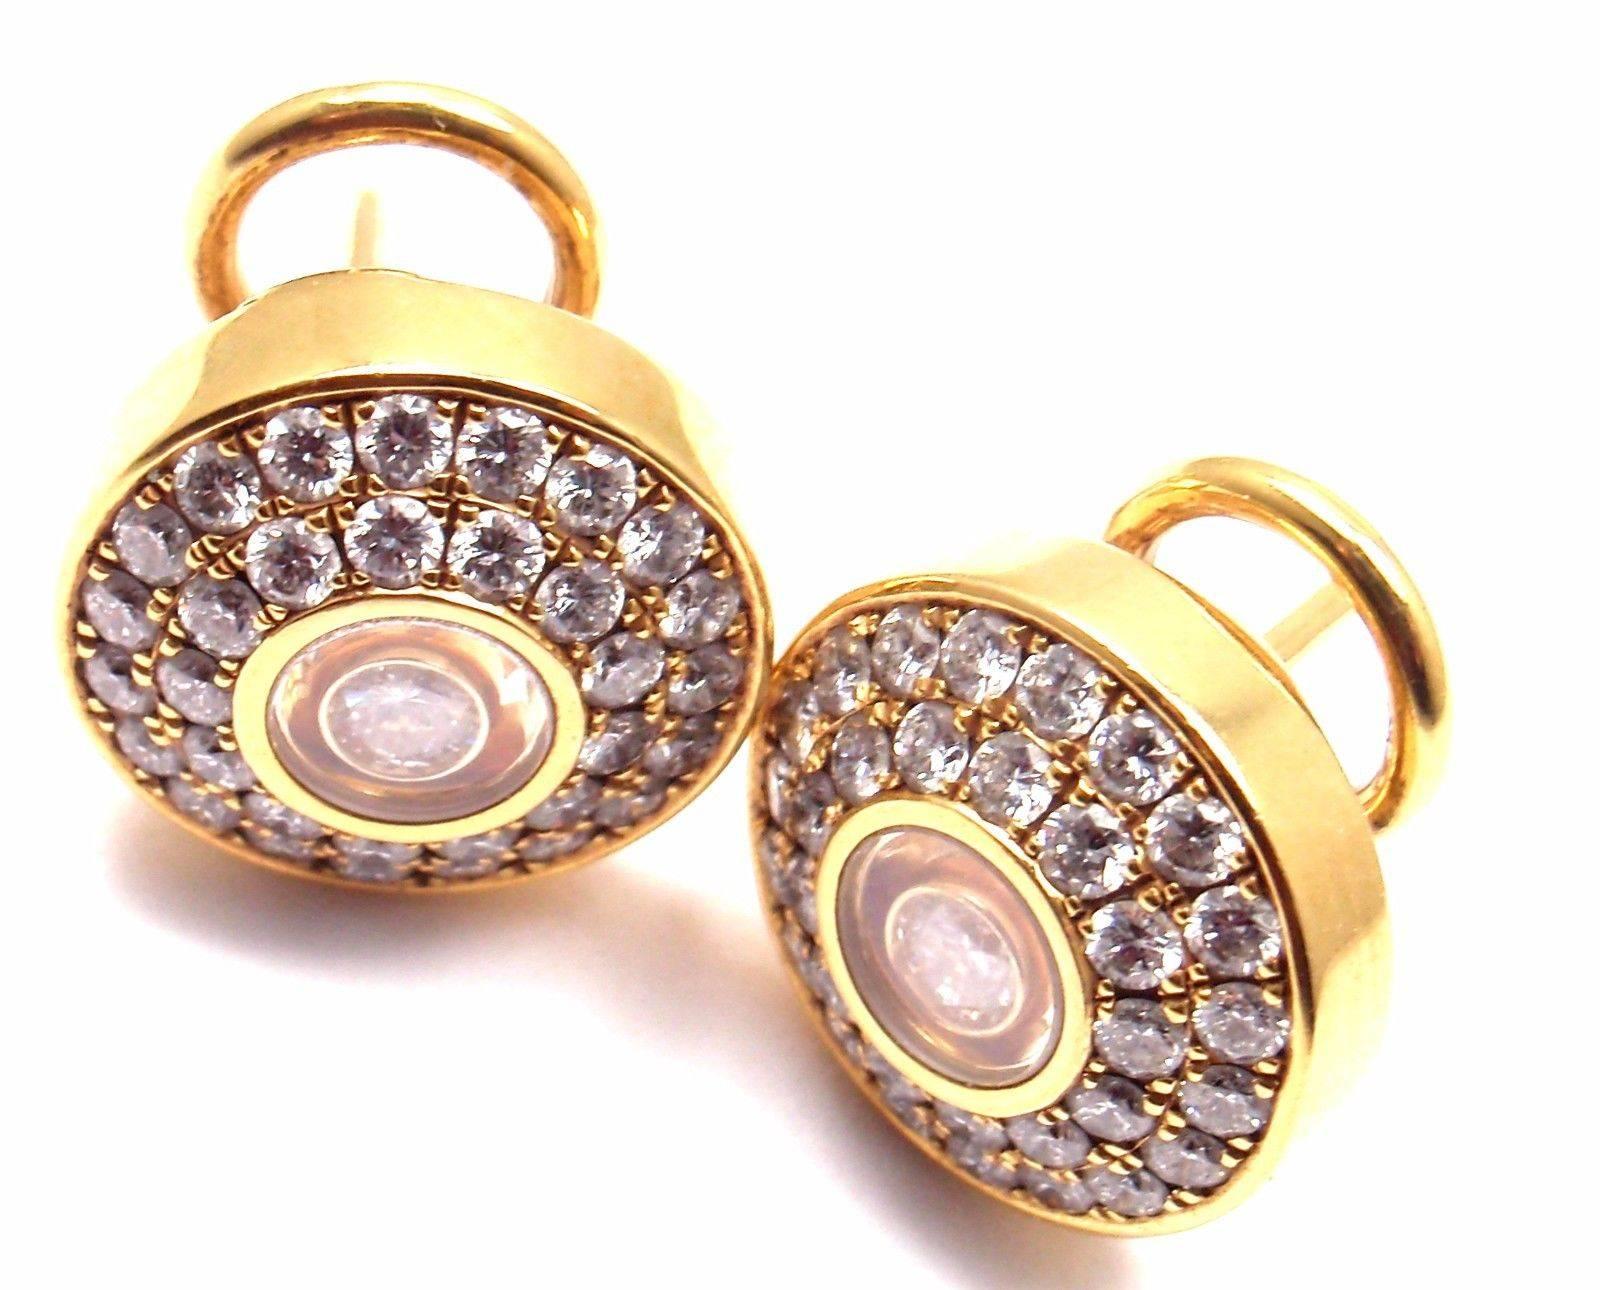 18k Yellow Gold Happy Diamond Earrings by Chopard.  
With 62 round brilliant cut diamonds VS1 clarity, G color total weight approx. 1.30ct
These earrings come with Chopard certificate and a Chopard box.
These earrings are for pierced